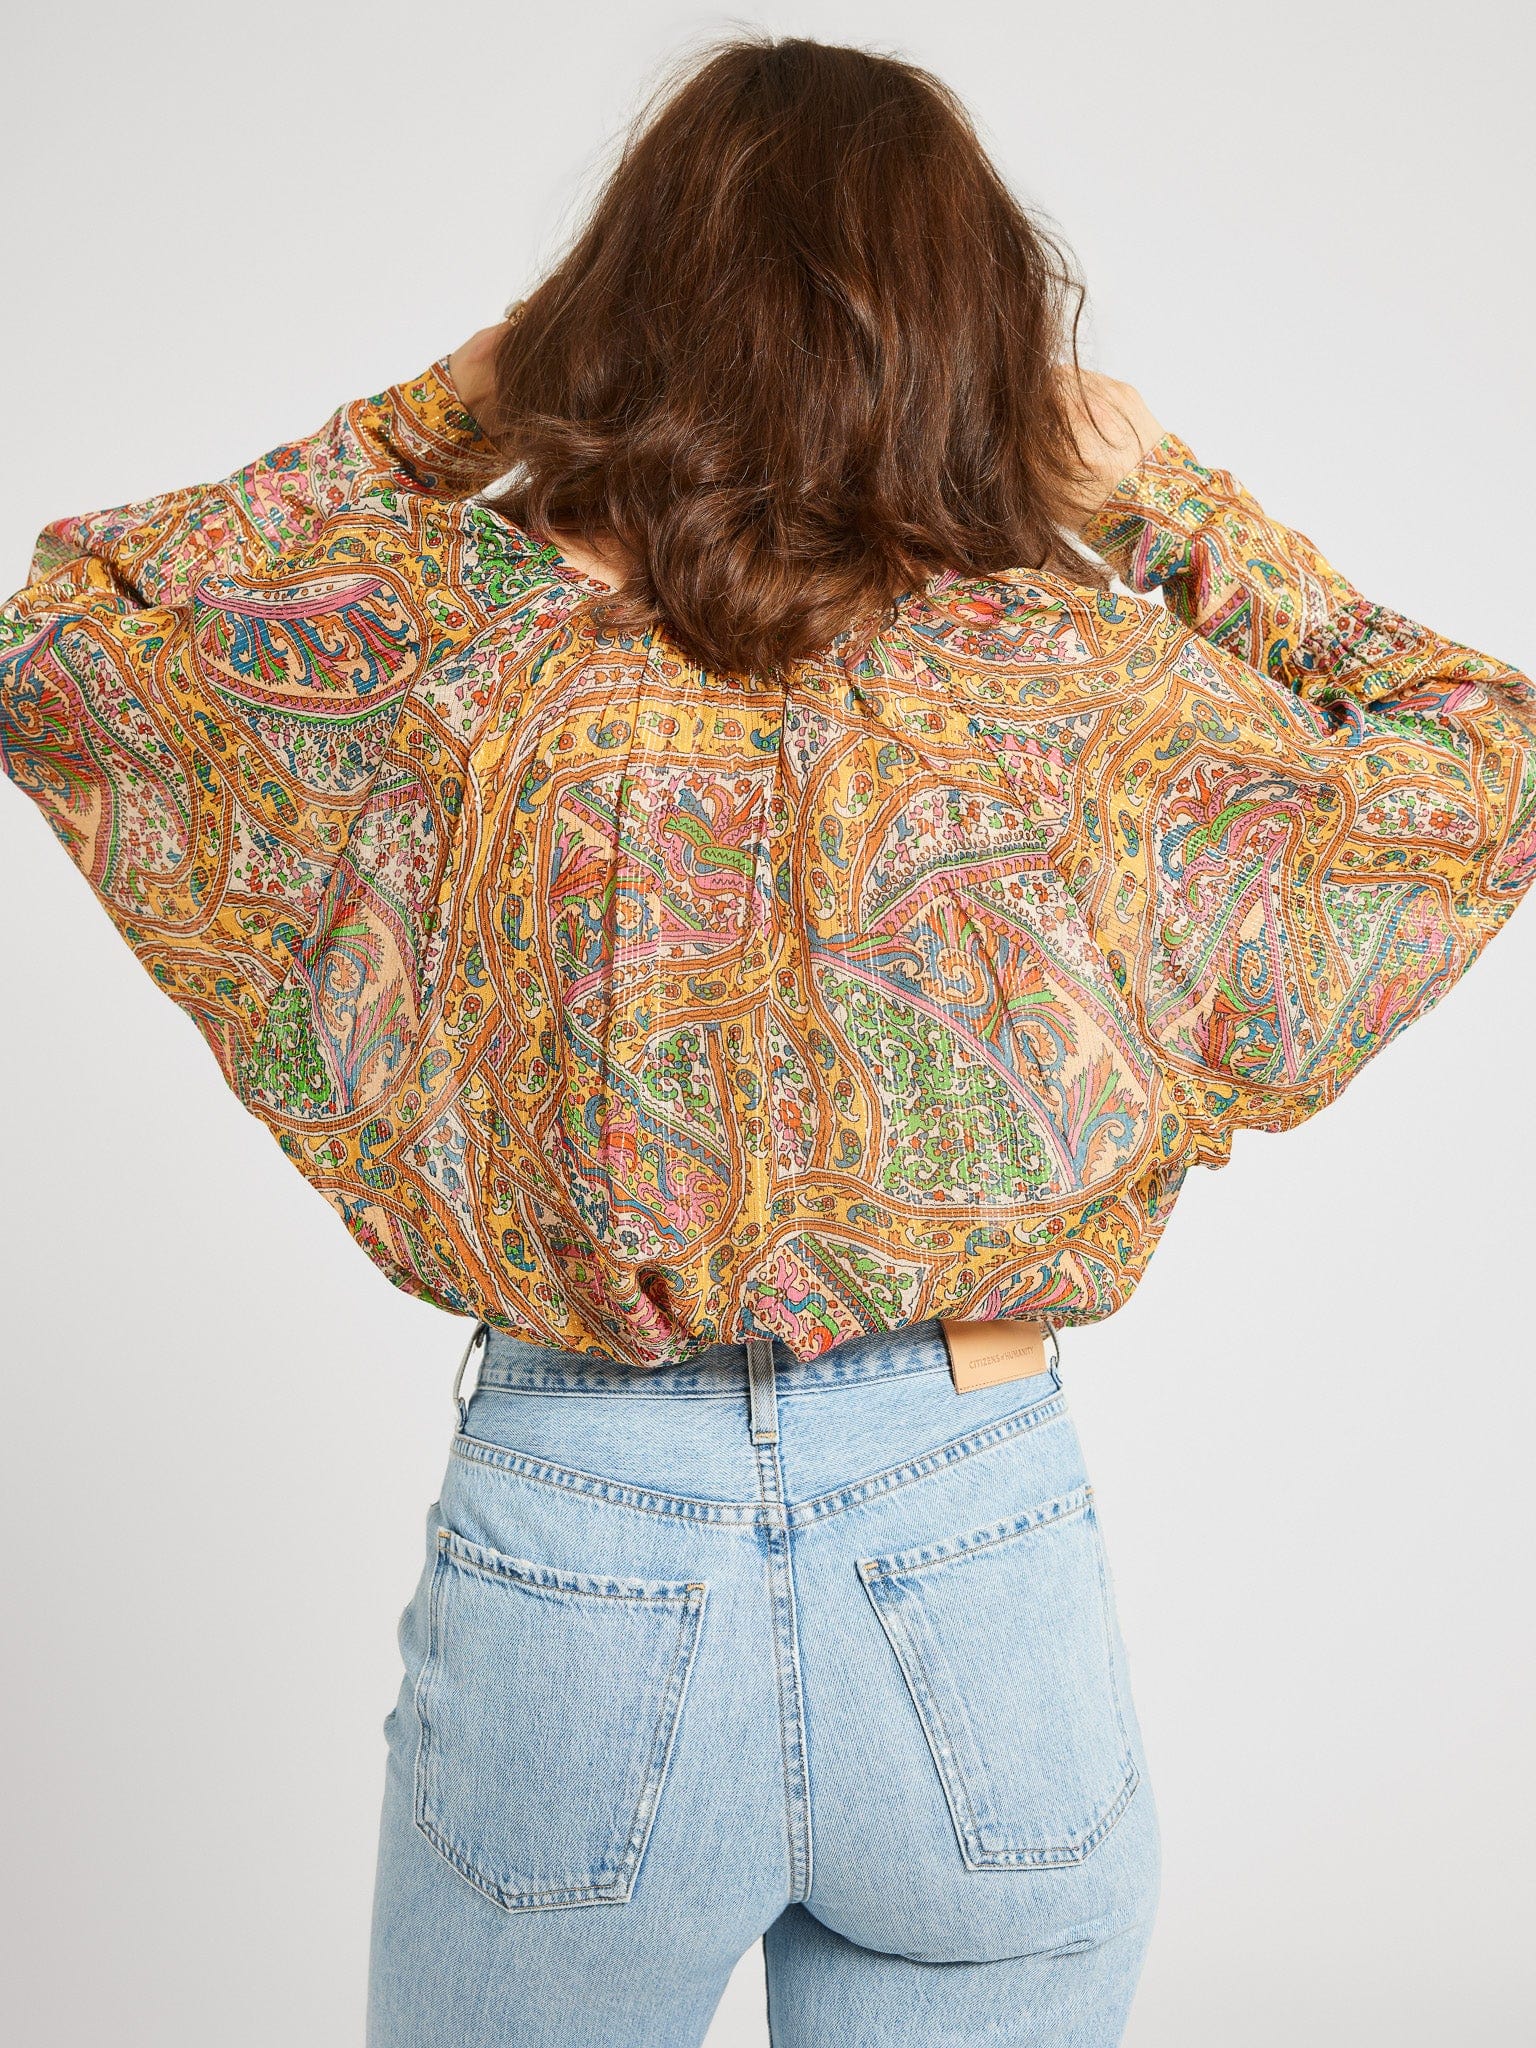 MILLE Clothing Madeline Top in Paisley Shimmer